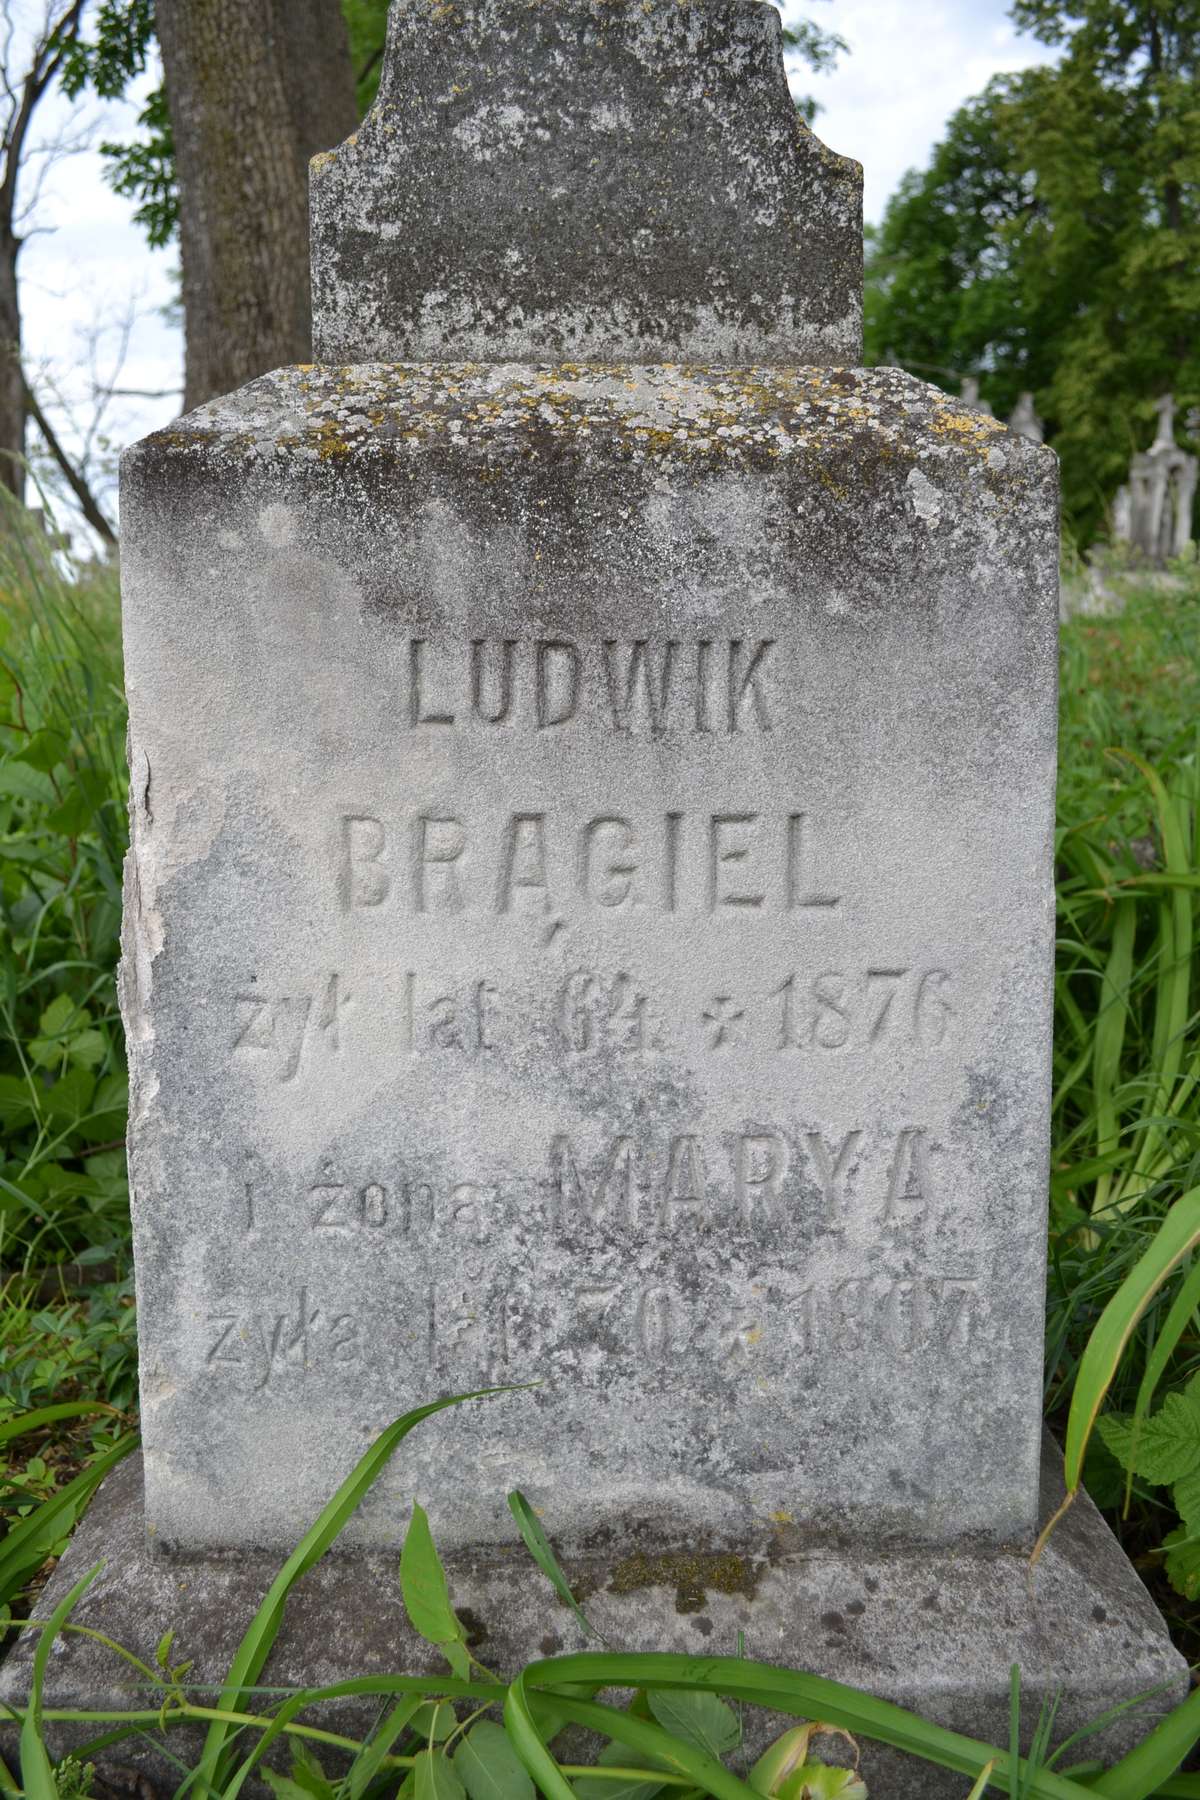 Fragment of the tombstone of Ludwik and Maria Brągiel, Zbaraż cemetery, as of 2018